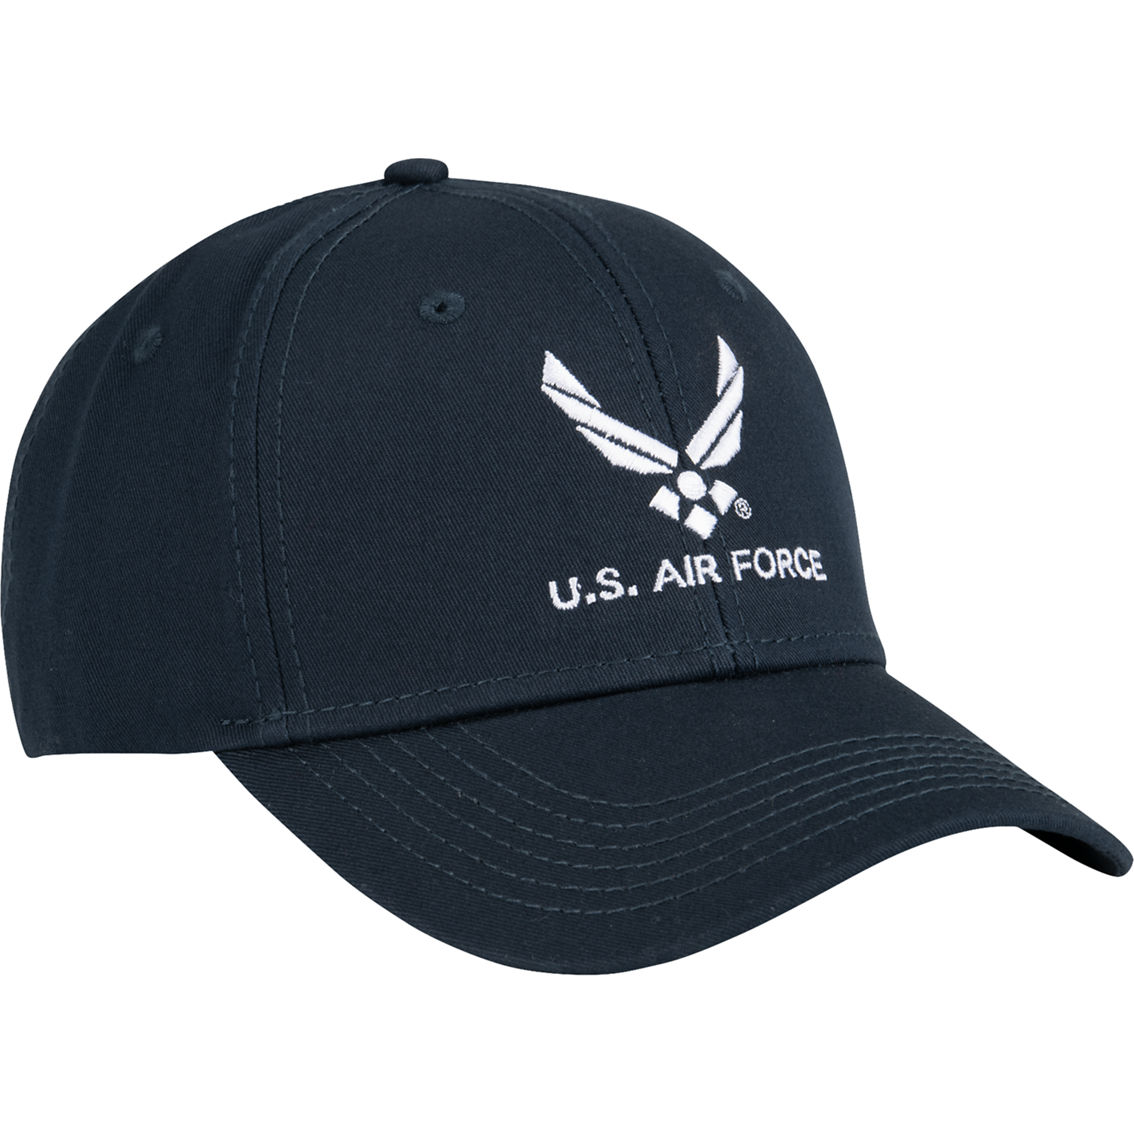 Blync Navy Blue Twill Cap Air Force - Image 2 of 2